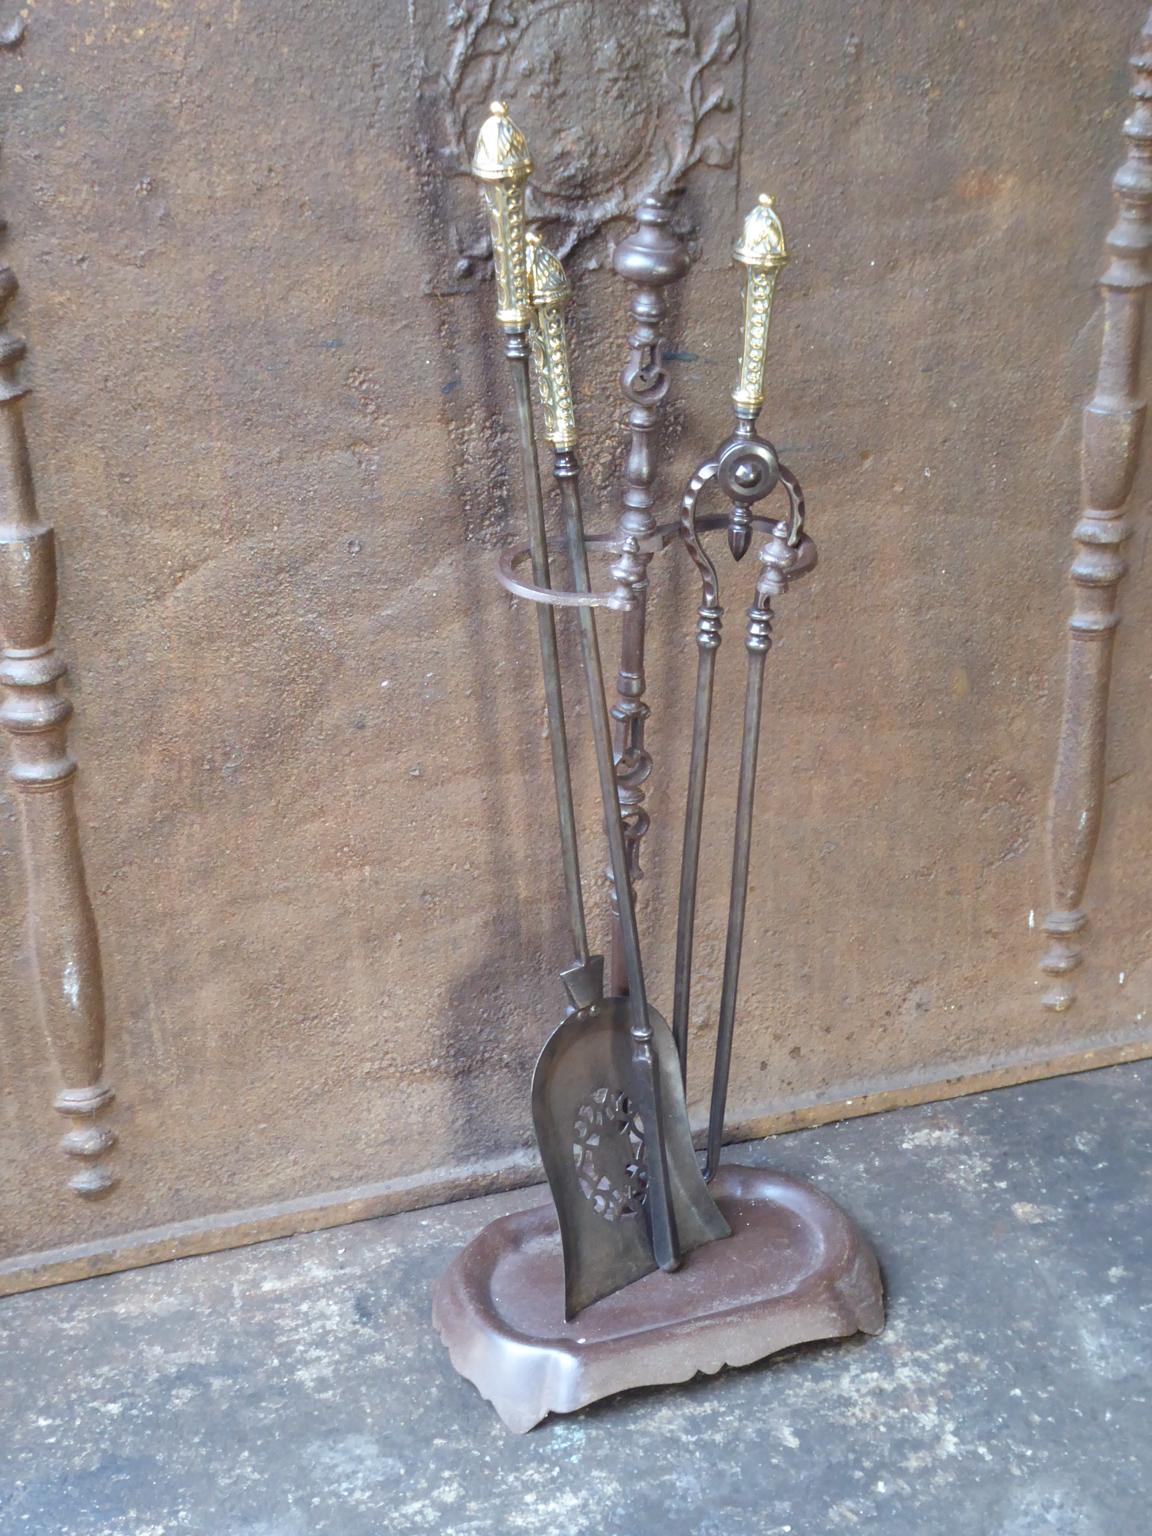 Forged Georgian Fireplace Tool Set or Fire Irons, 18th-19th Century